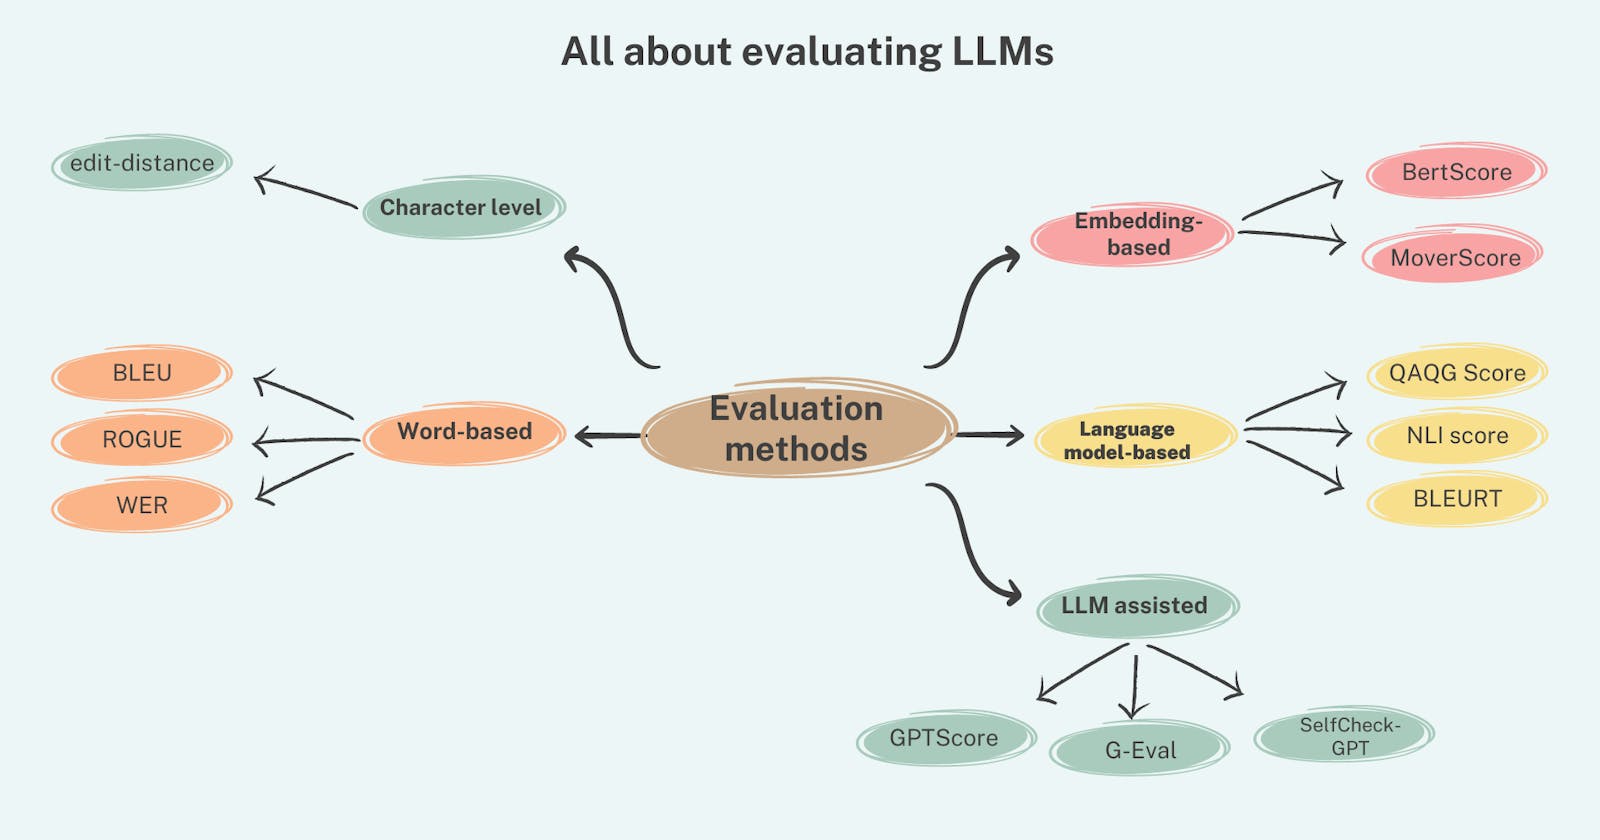 The Most Effective Methods for Evaluating LLMs.